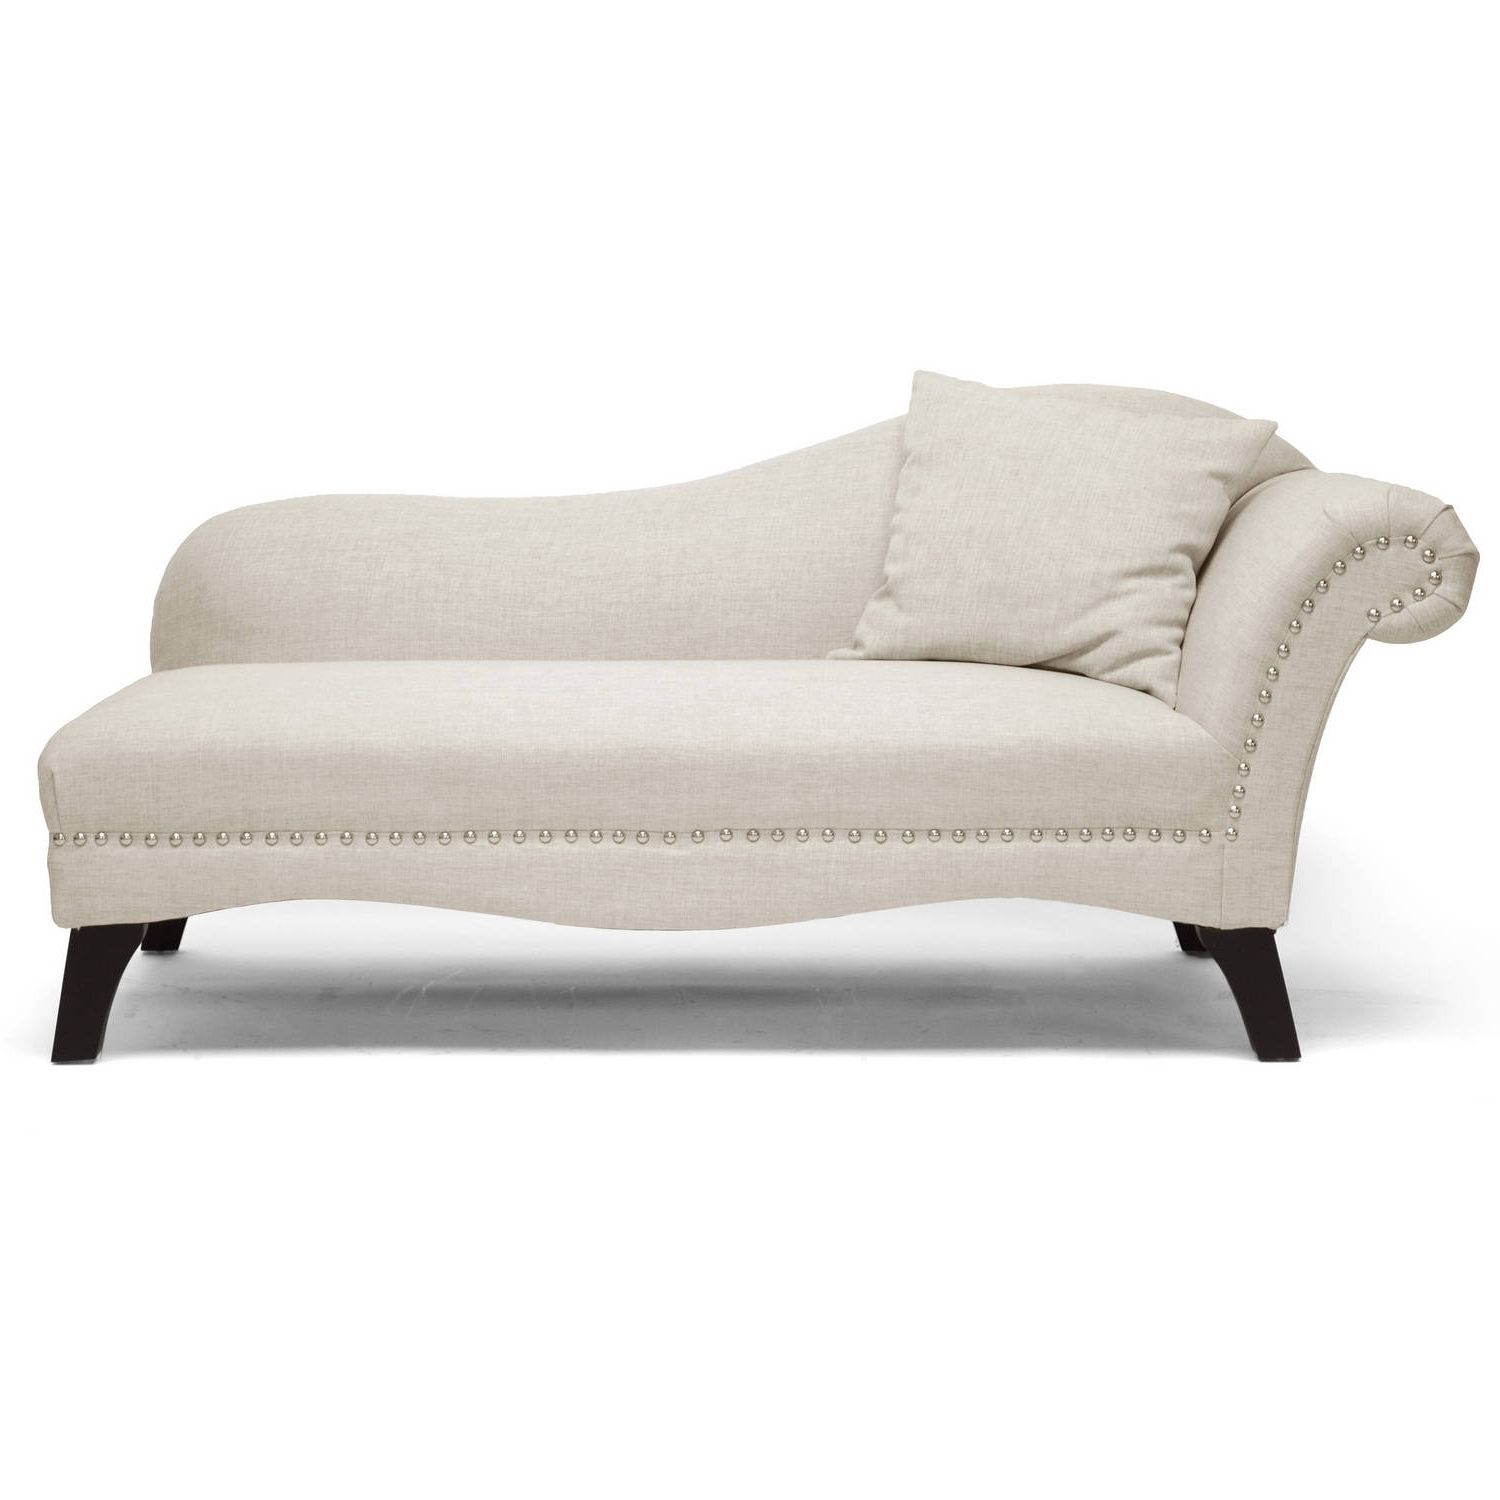 Latest Chaise Lounges – Walmart For White Chaise Lounges (View 4 of 15)